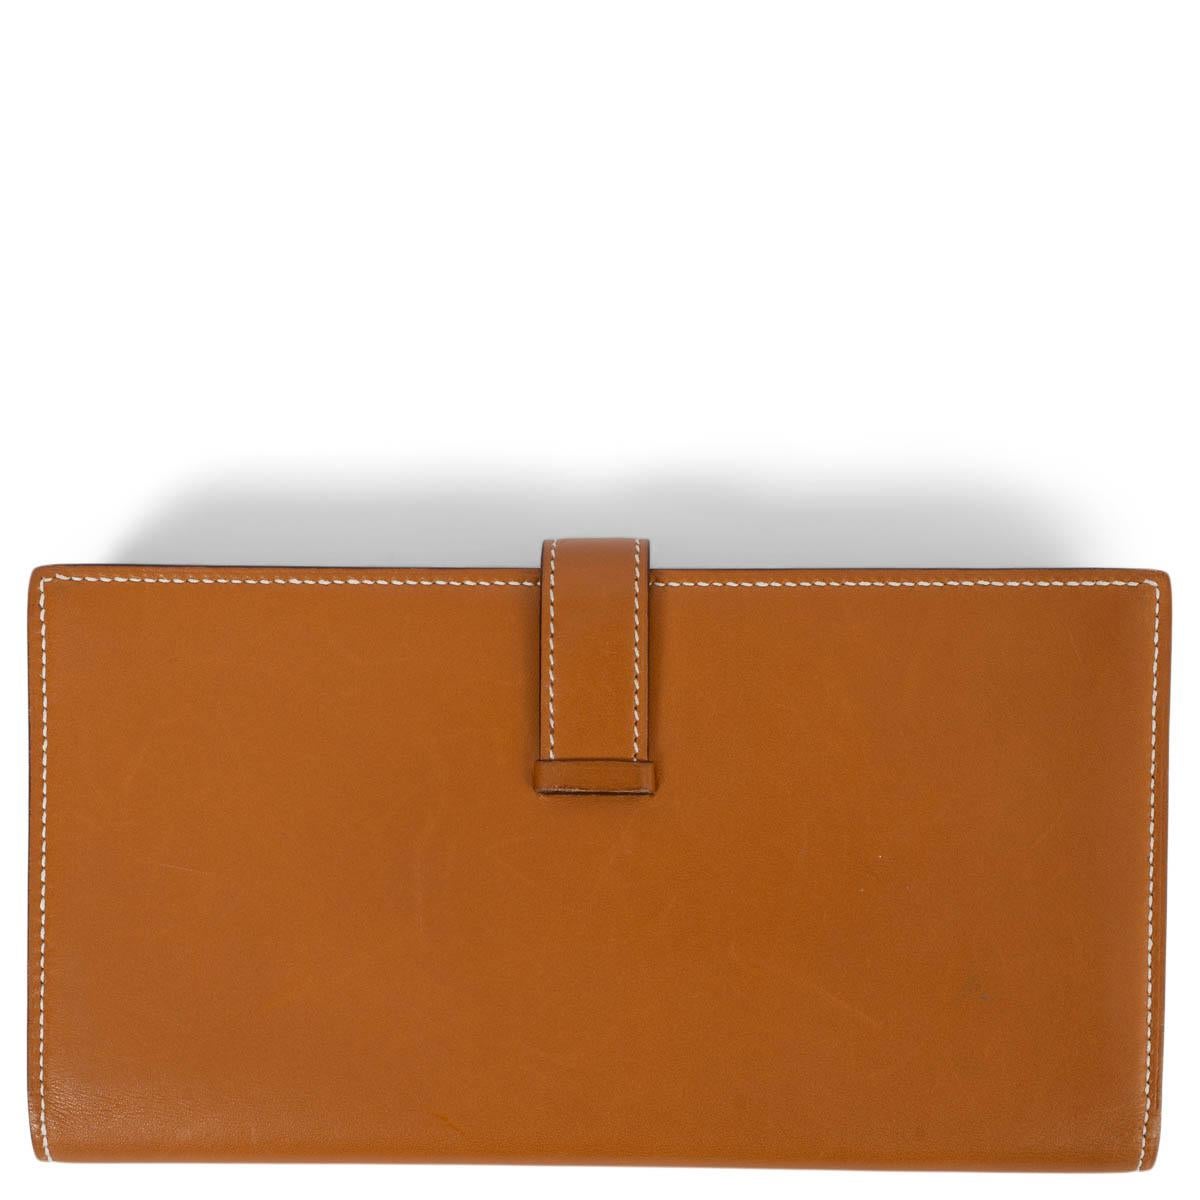 100% authentic Hermès Bearn Soufflet wallet in Naturel Sable (beige) Veau Butler smooth leather featuring Palladium hardware. The design features a zipper pocket for coins, five credit card slots and three open pockets for bills. Has been carried